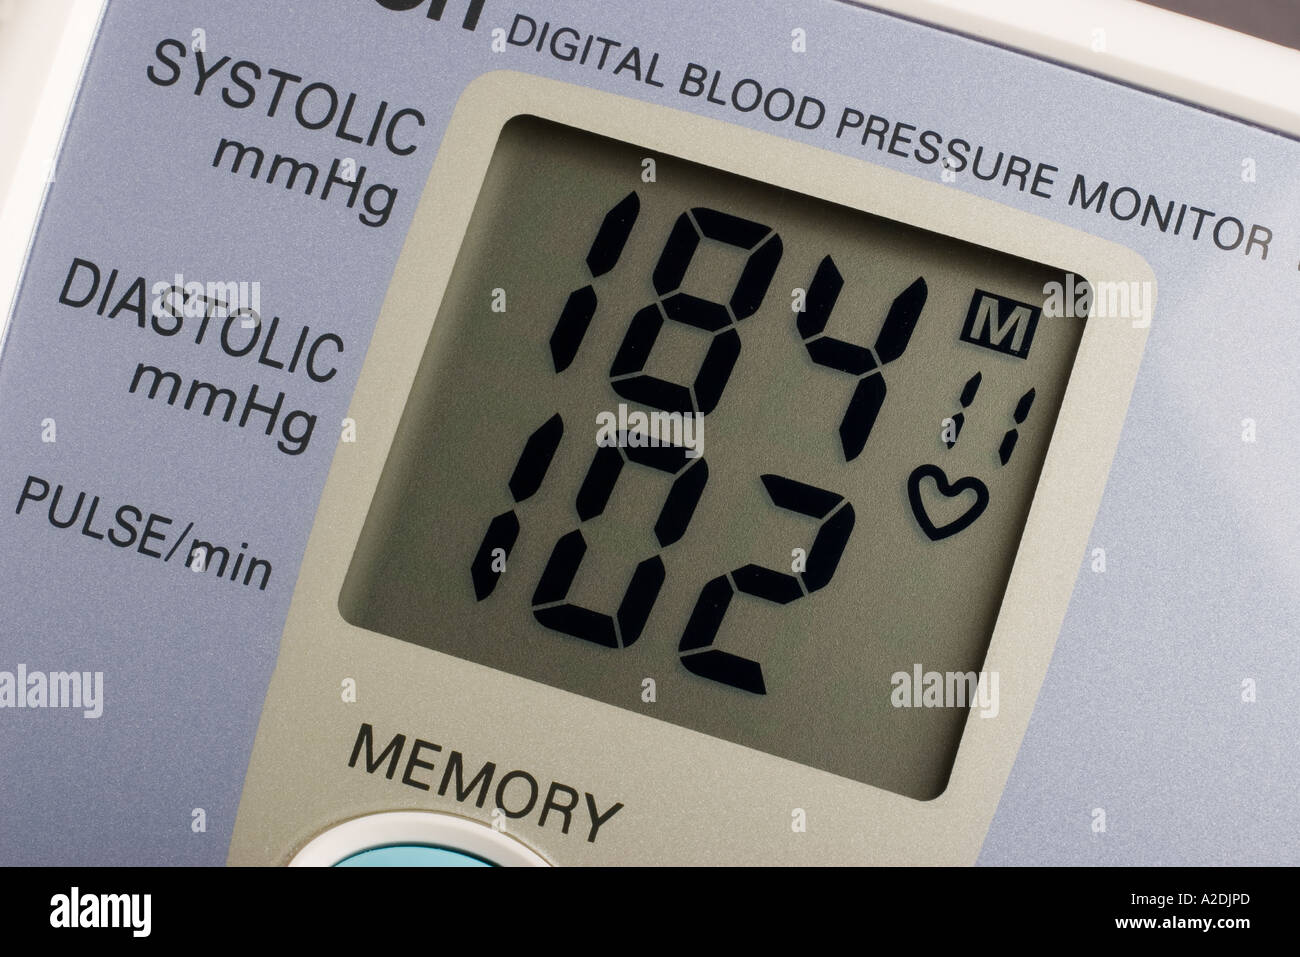 Blood pressure measurement - Stock Image - F002/7128 - Science Photo Library